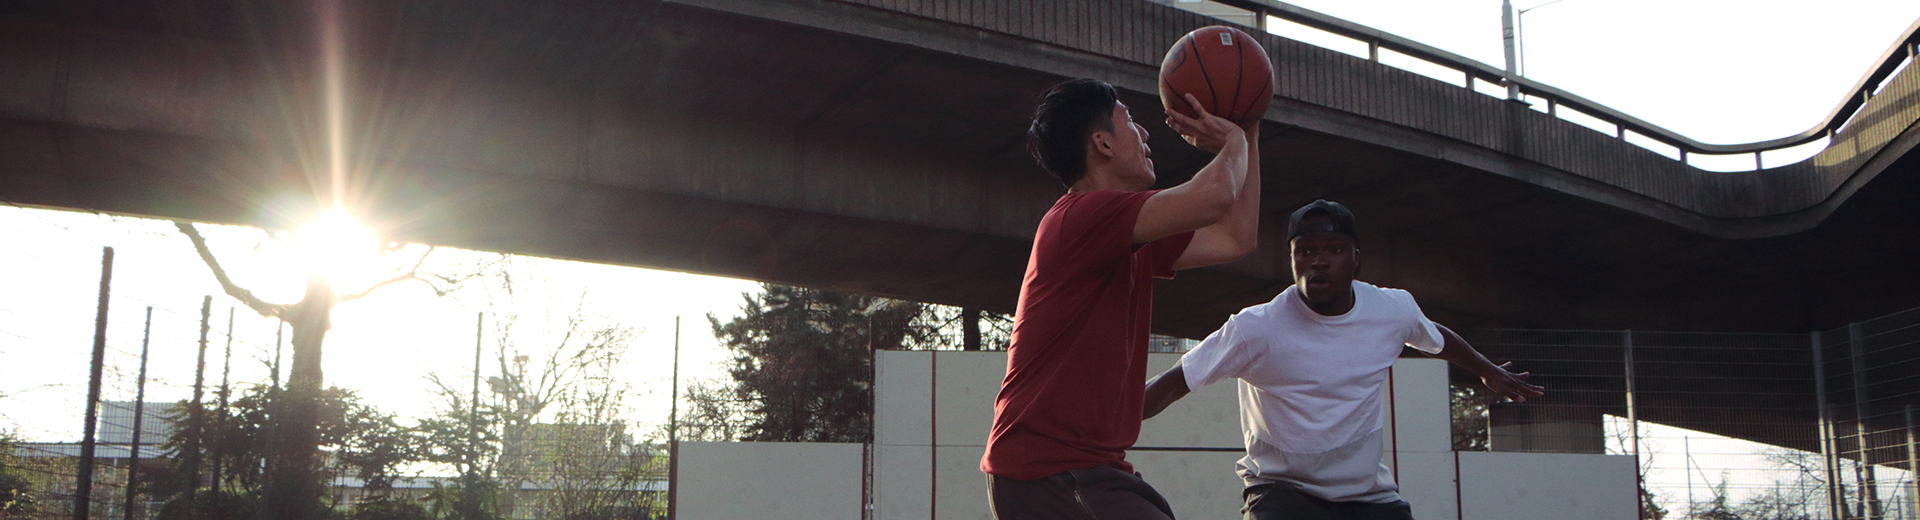 2 men playing basketball with sunlight behind them